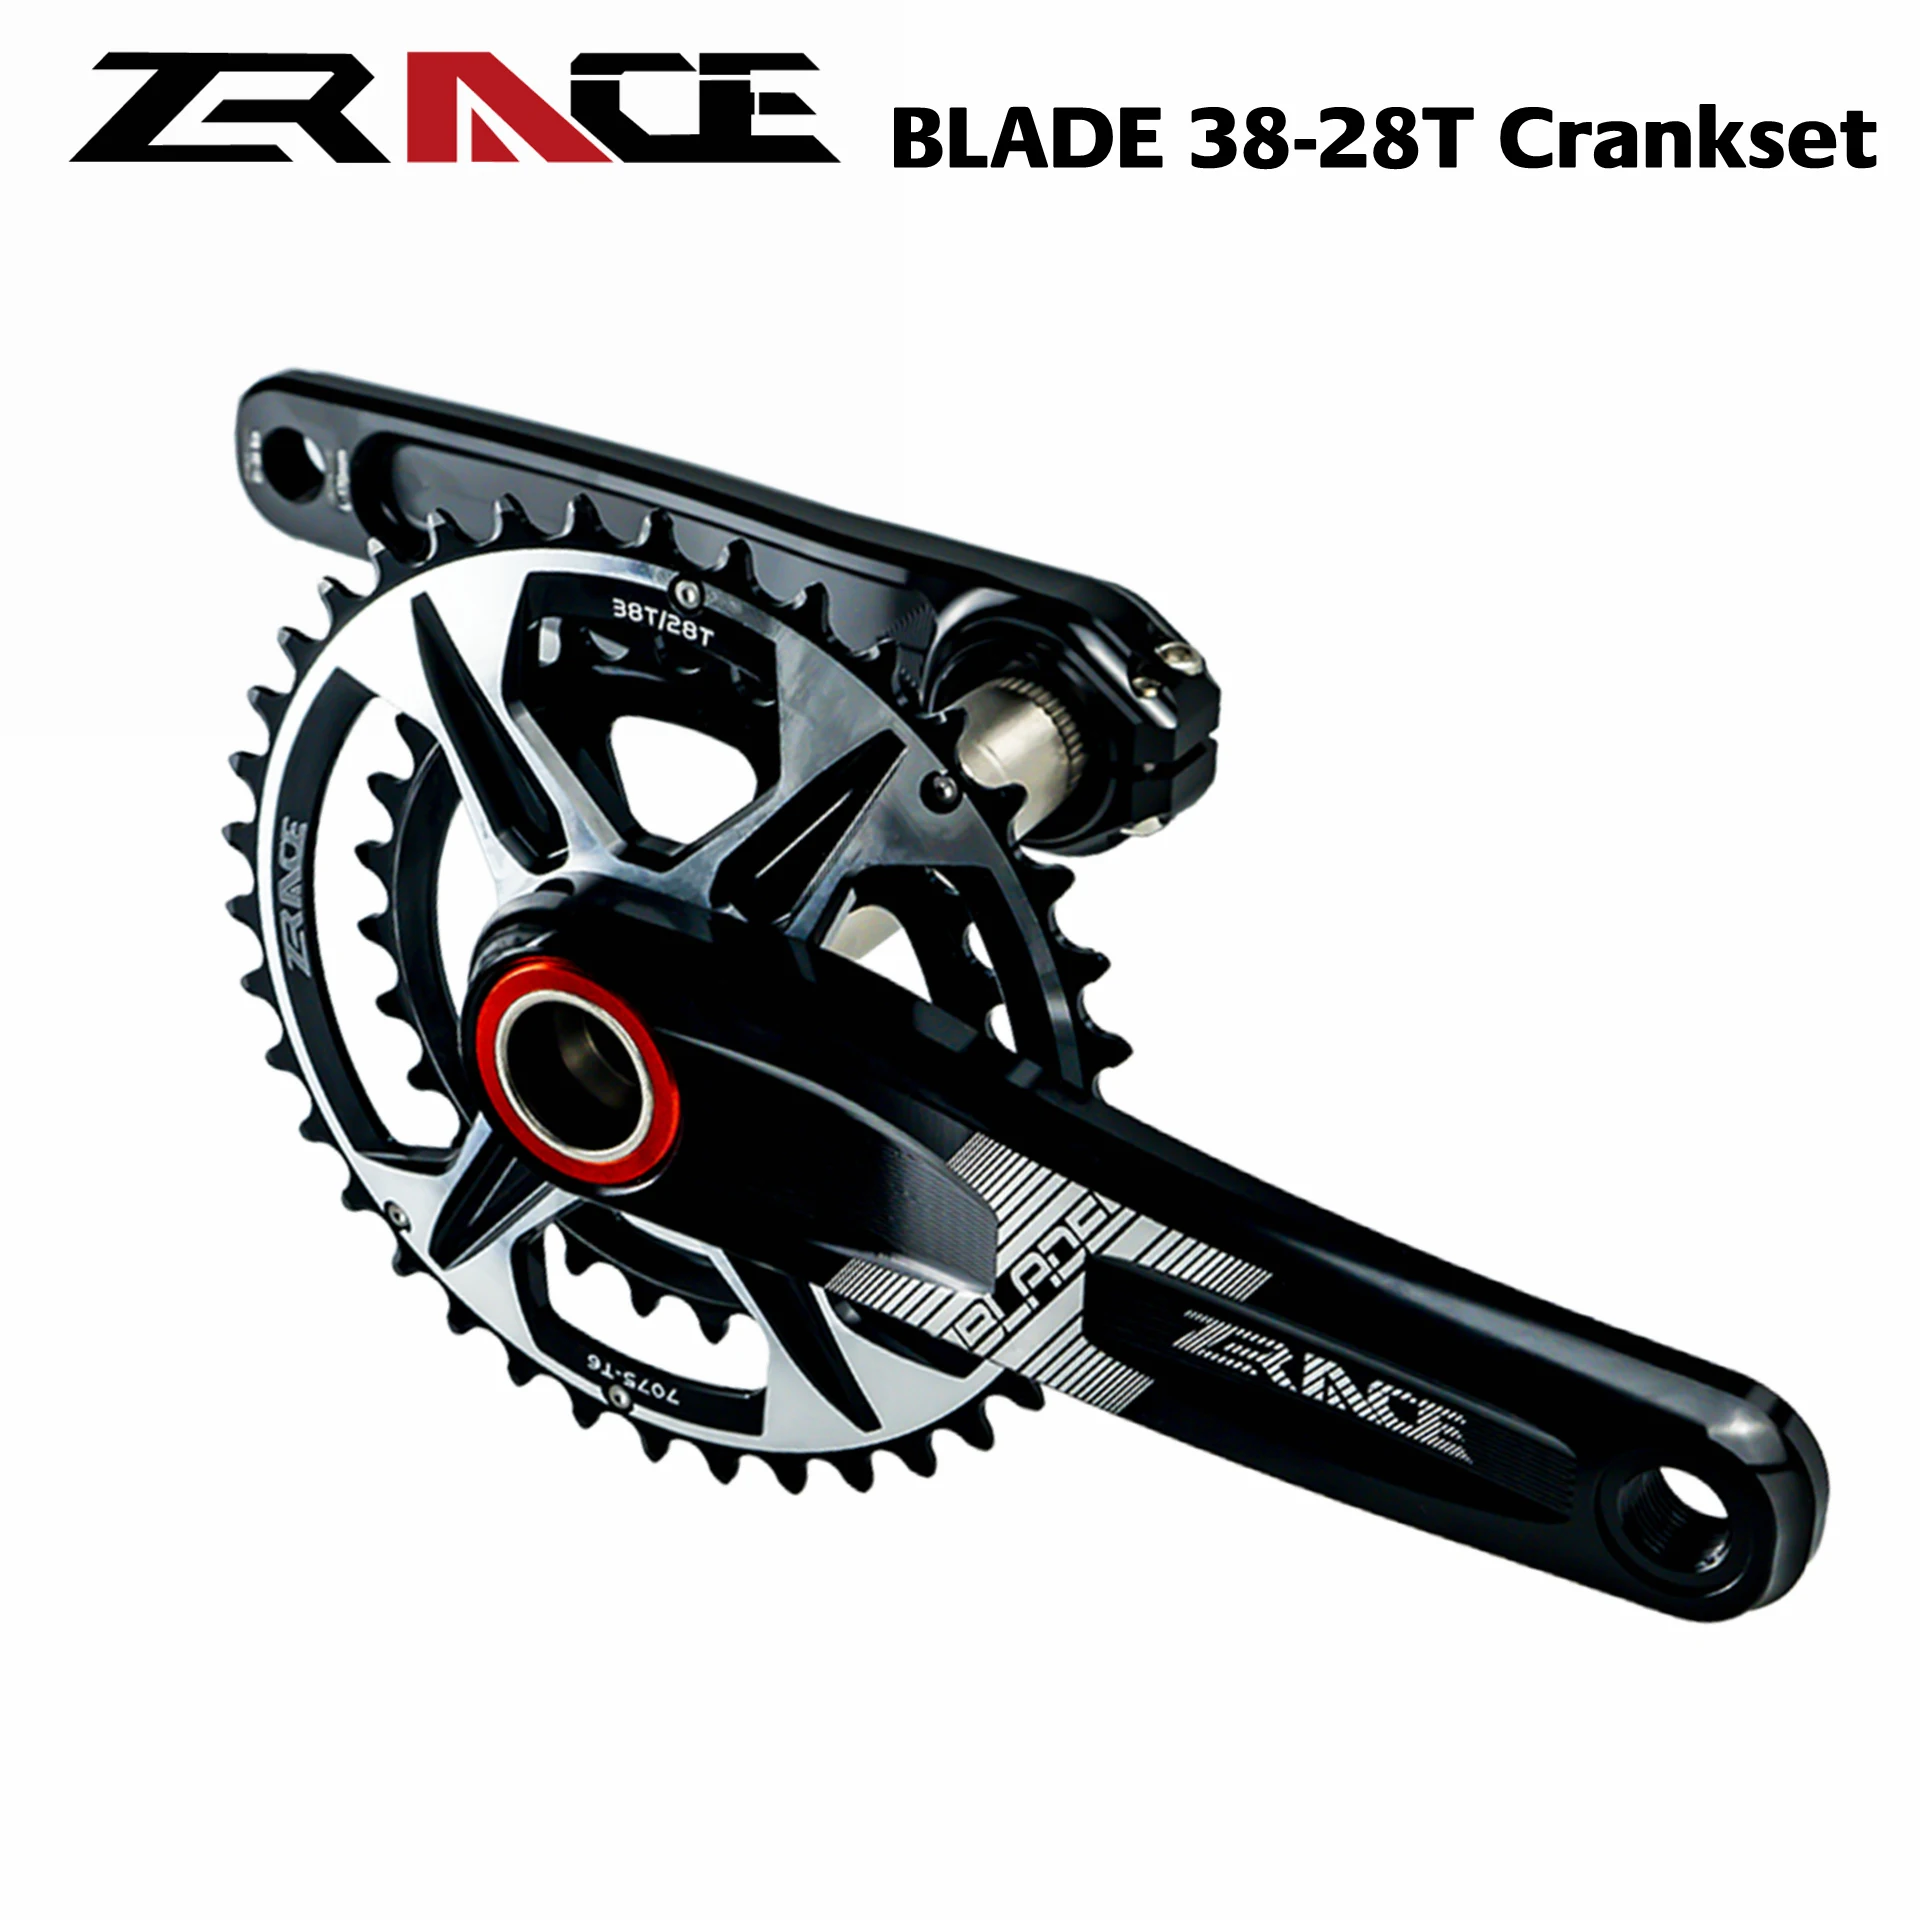 ZRACE BLADE 2 x 10 11 12 Speed Crankset Eagle Tooth for MTB XC / TR / AM 170 / 175mm,38-28T, BB68/73 Chainset